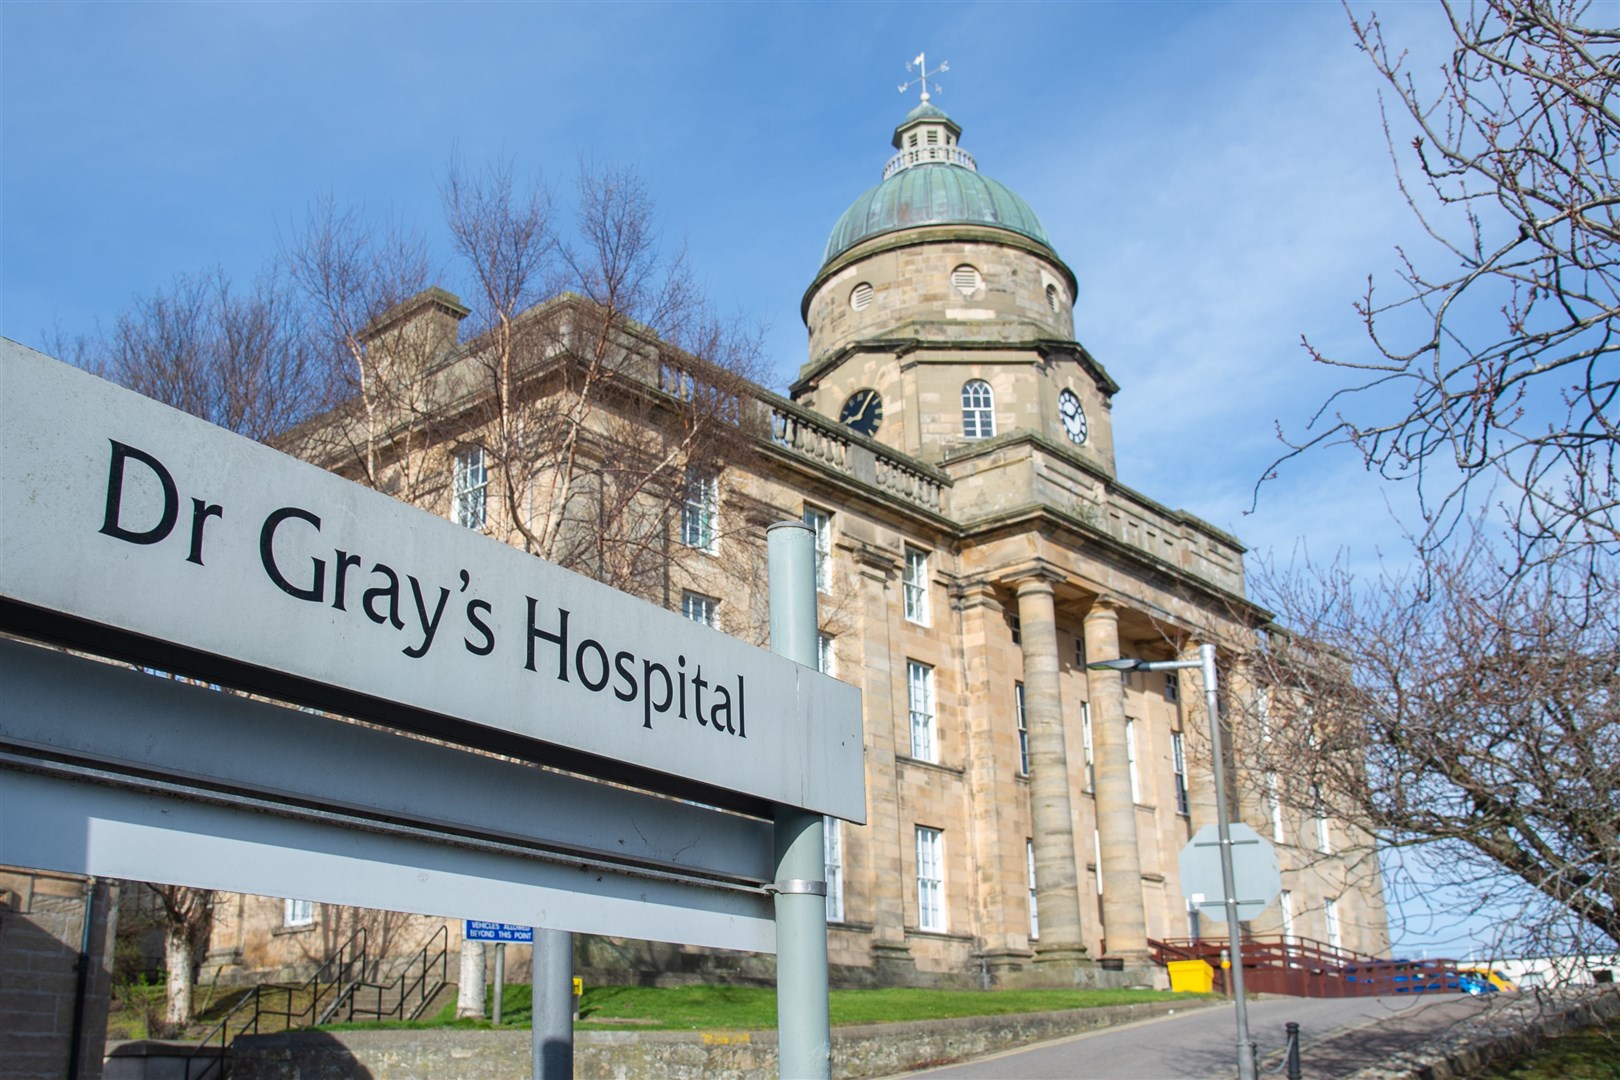 Recruitment will be pivotal if maternity services are to be fully restored at Dr Gray's Hospital in Elgin by 2026. Picture: Daniel Forsyth